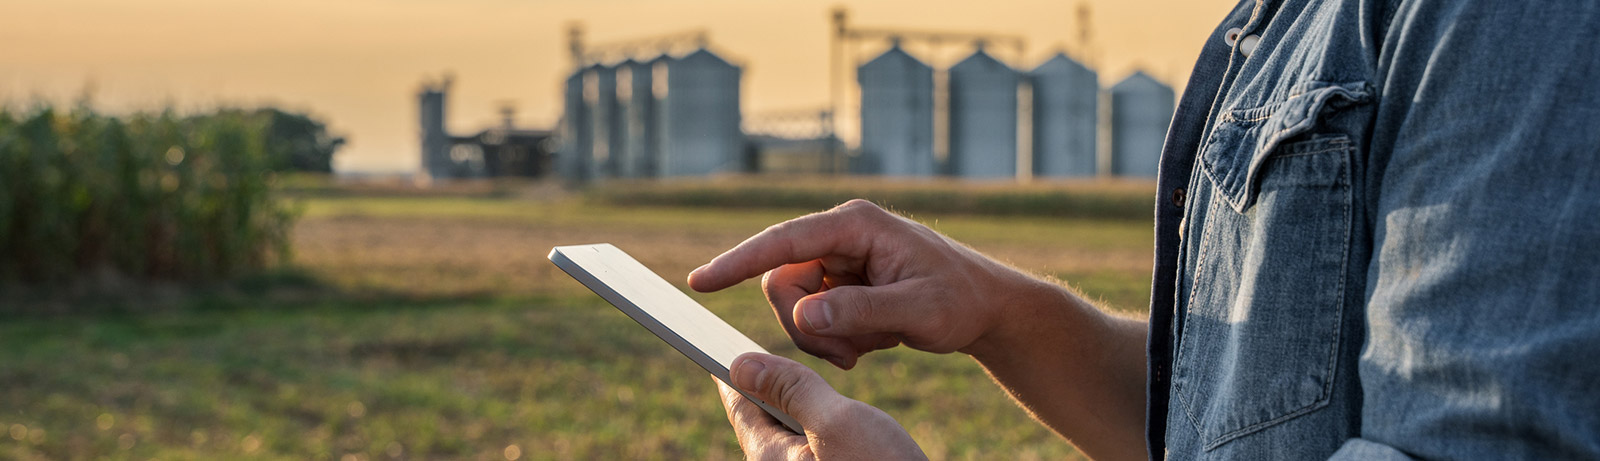 Farmer using tablet to look at crop information